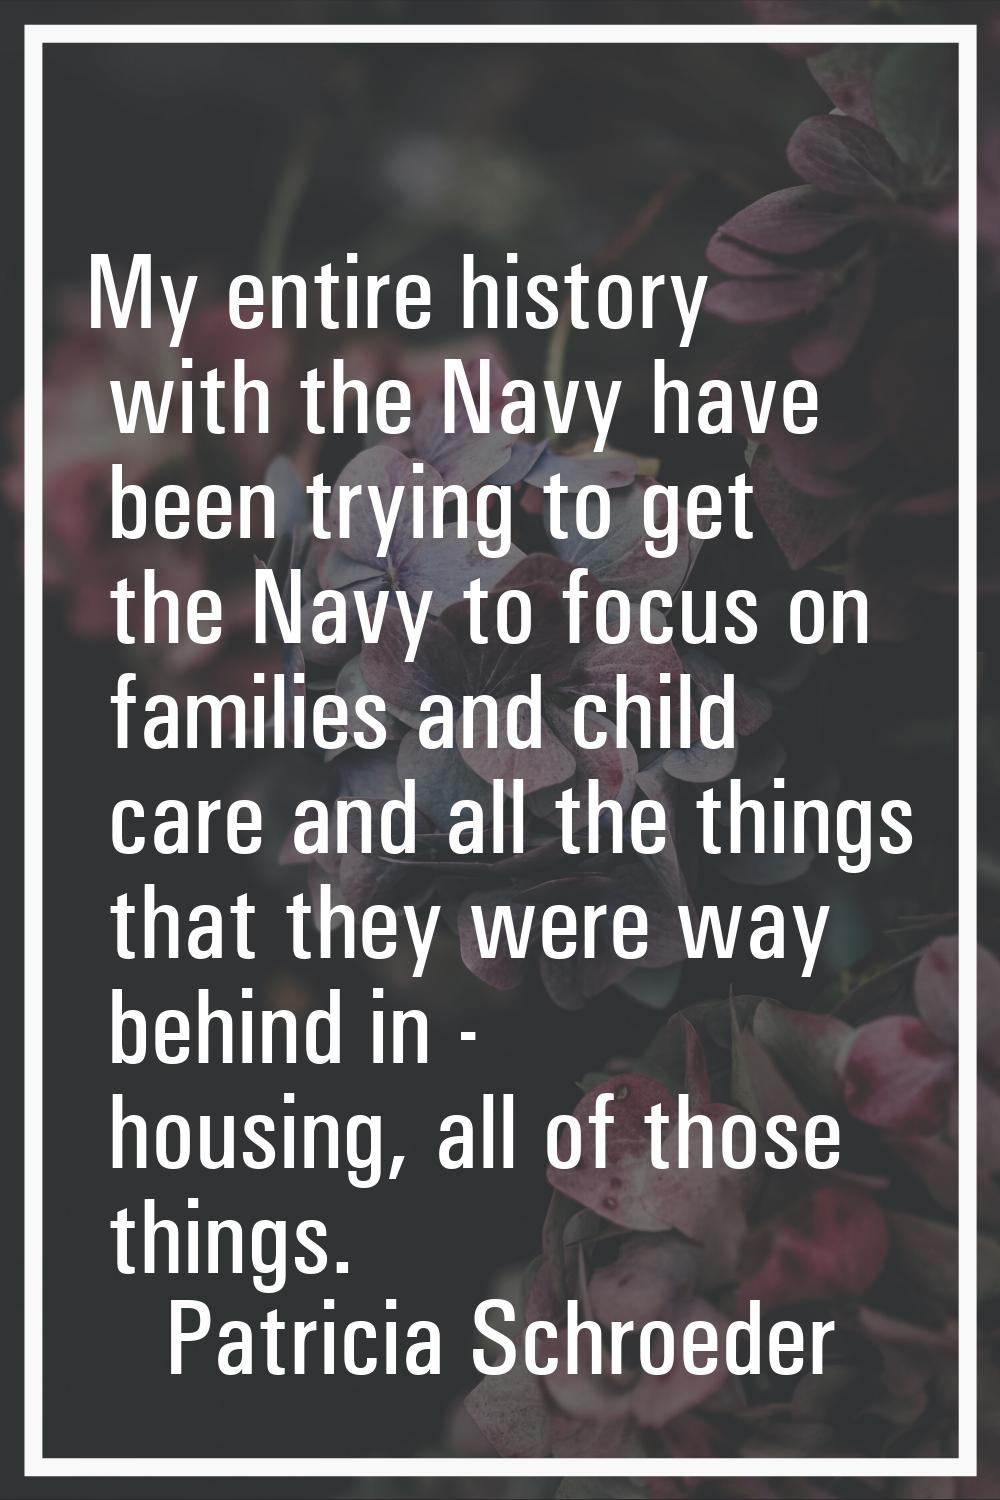 My entire history with the Navy have been trying to get the Navy to focus on families and child car